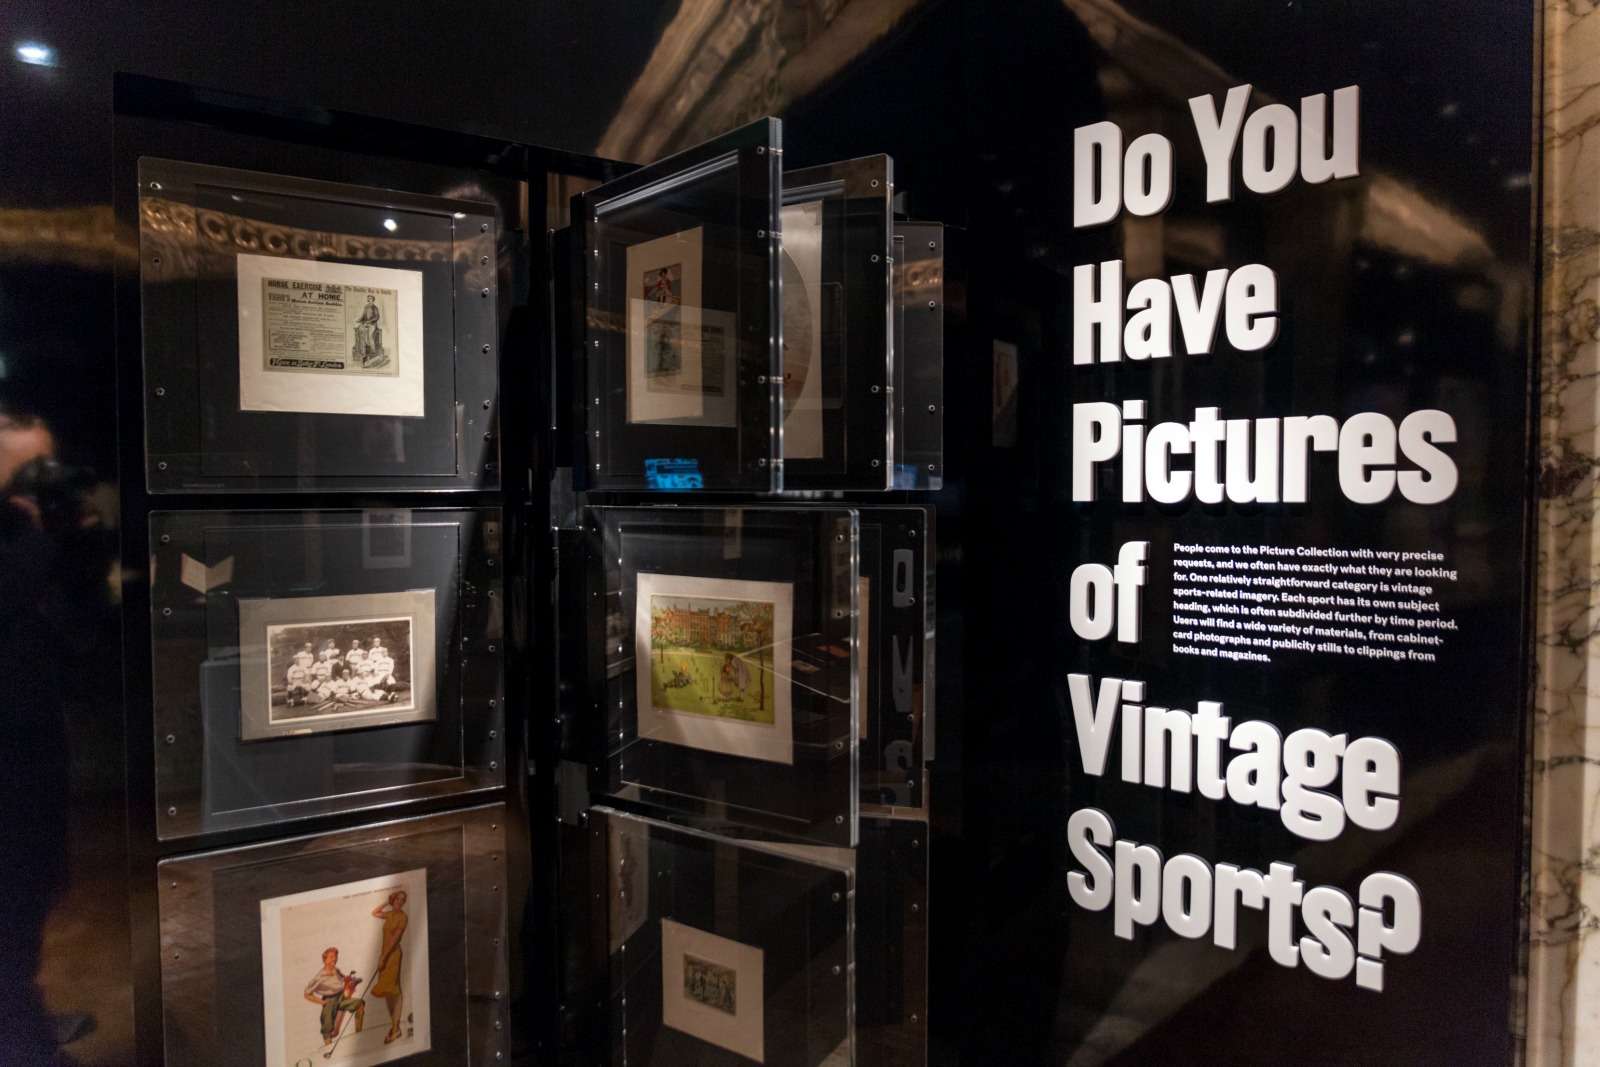 HISTORY...vintage sports are featured in the show ©NYPL